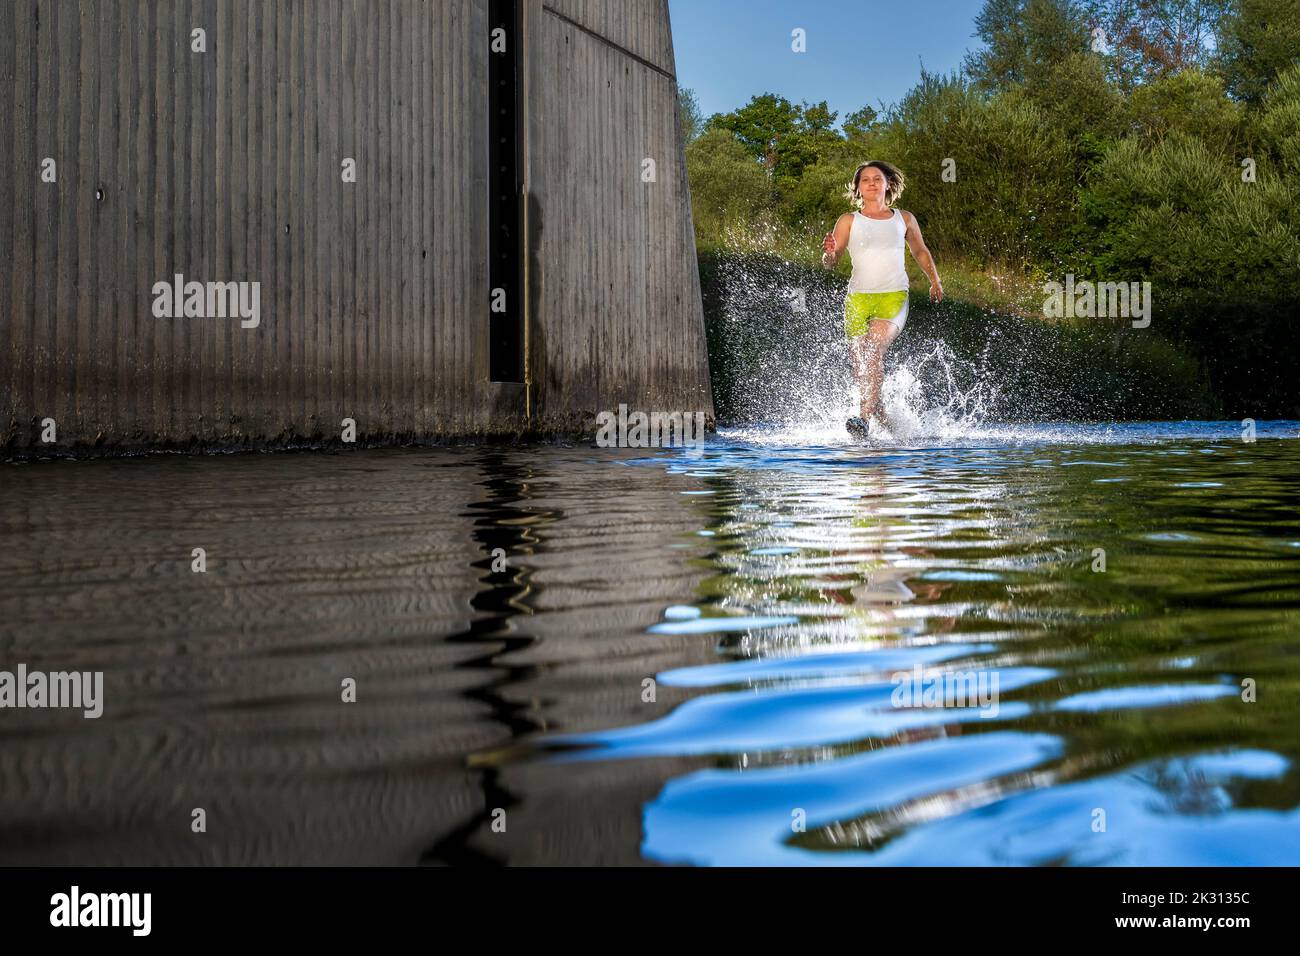 Young woman running through river water in front of tree Stock Photo